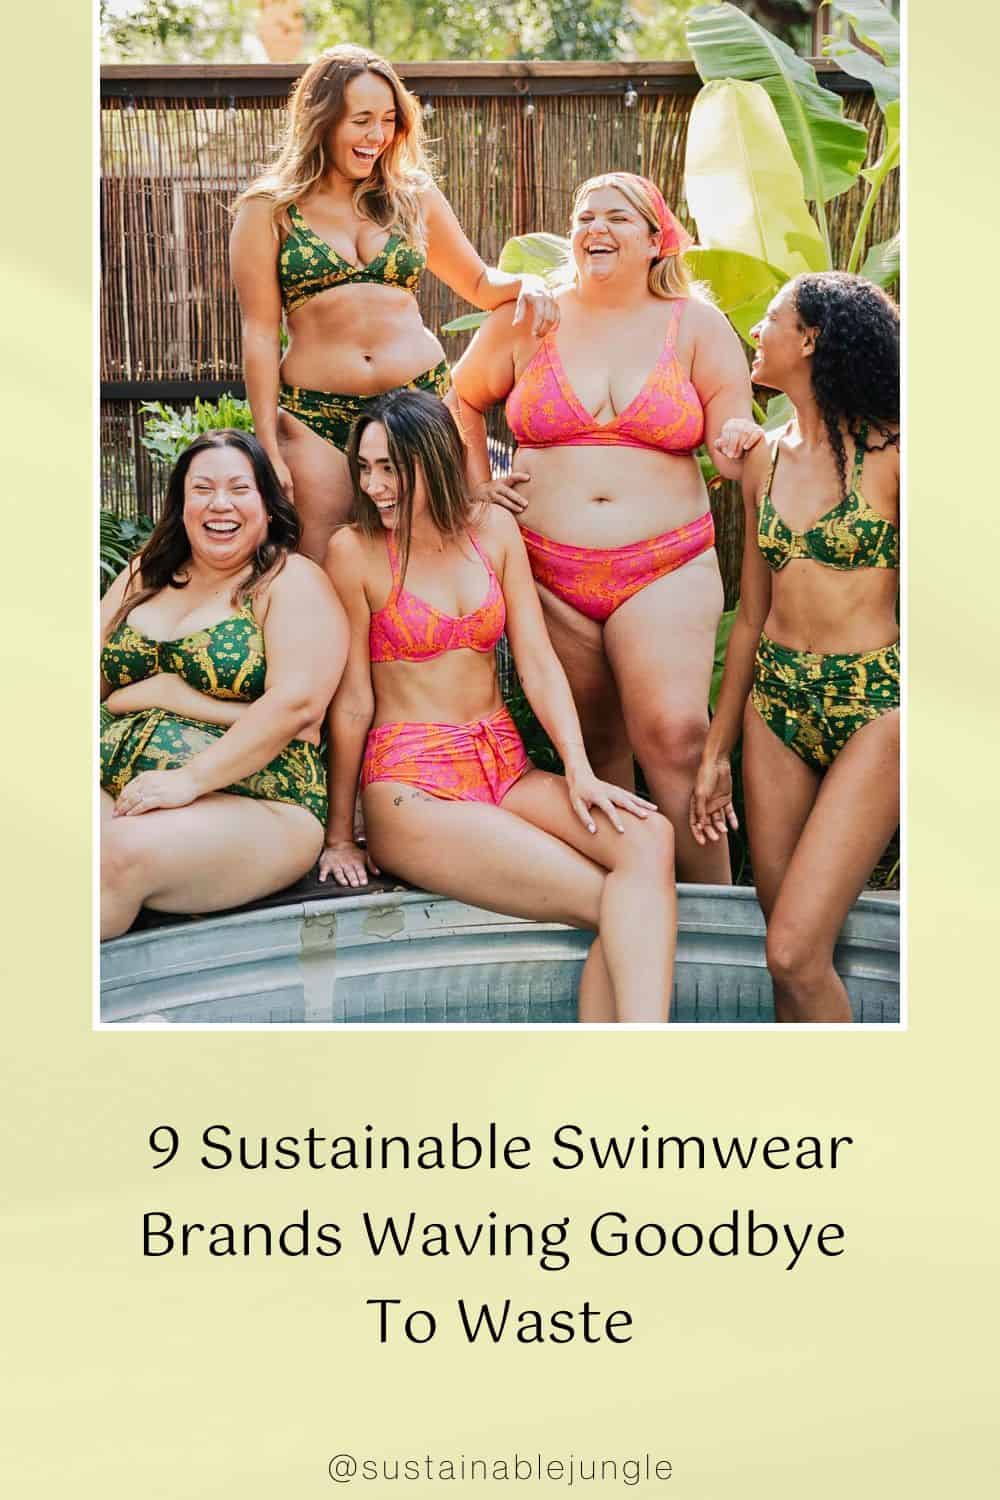 9 Sustainable Swimwear Brands Waving Goodbye To Waste Image by Kitty and Vibe #sustainableswimwear #sustainableswimwearbrands #sustainableswimsuits #sustainablebathingsuits #ethicalswimwear #ethicalswimsuits #sustainablejungle